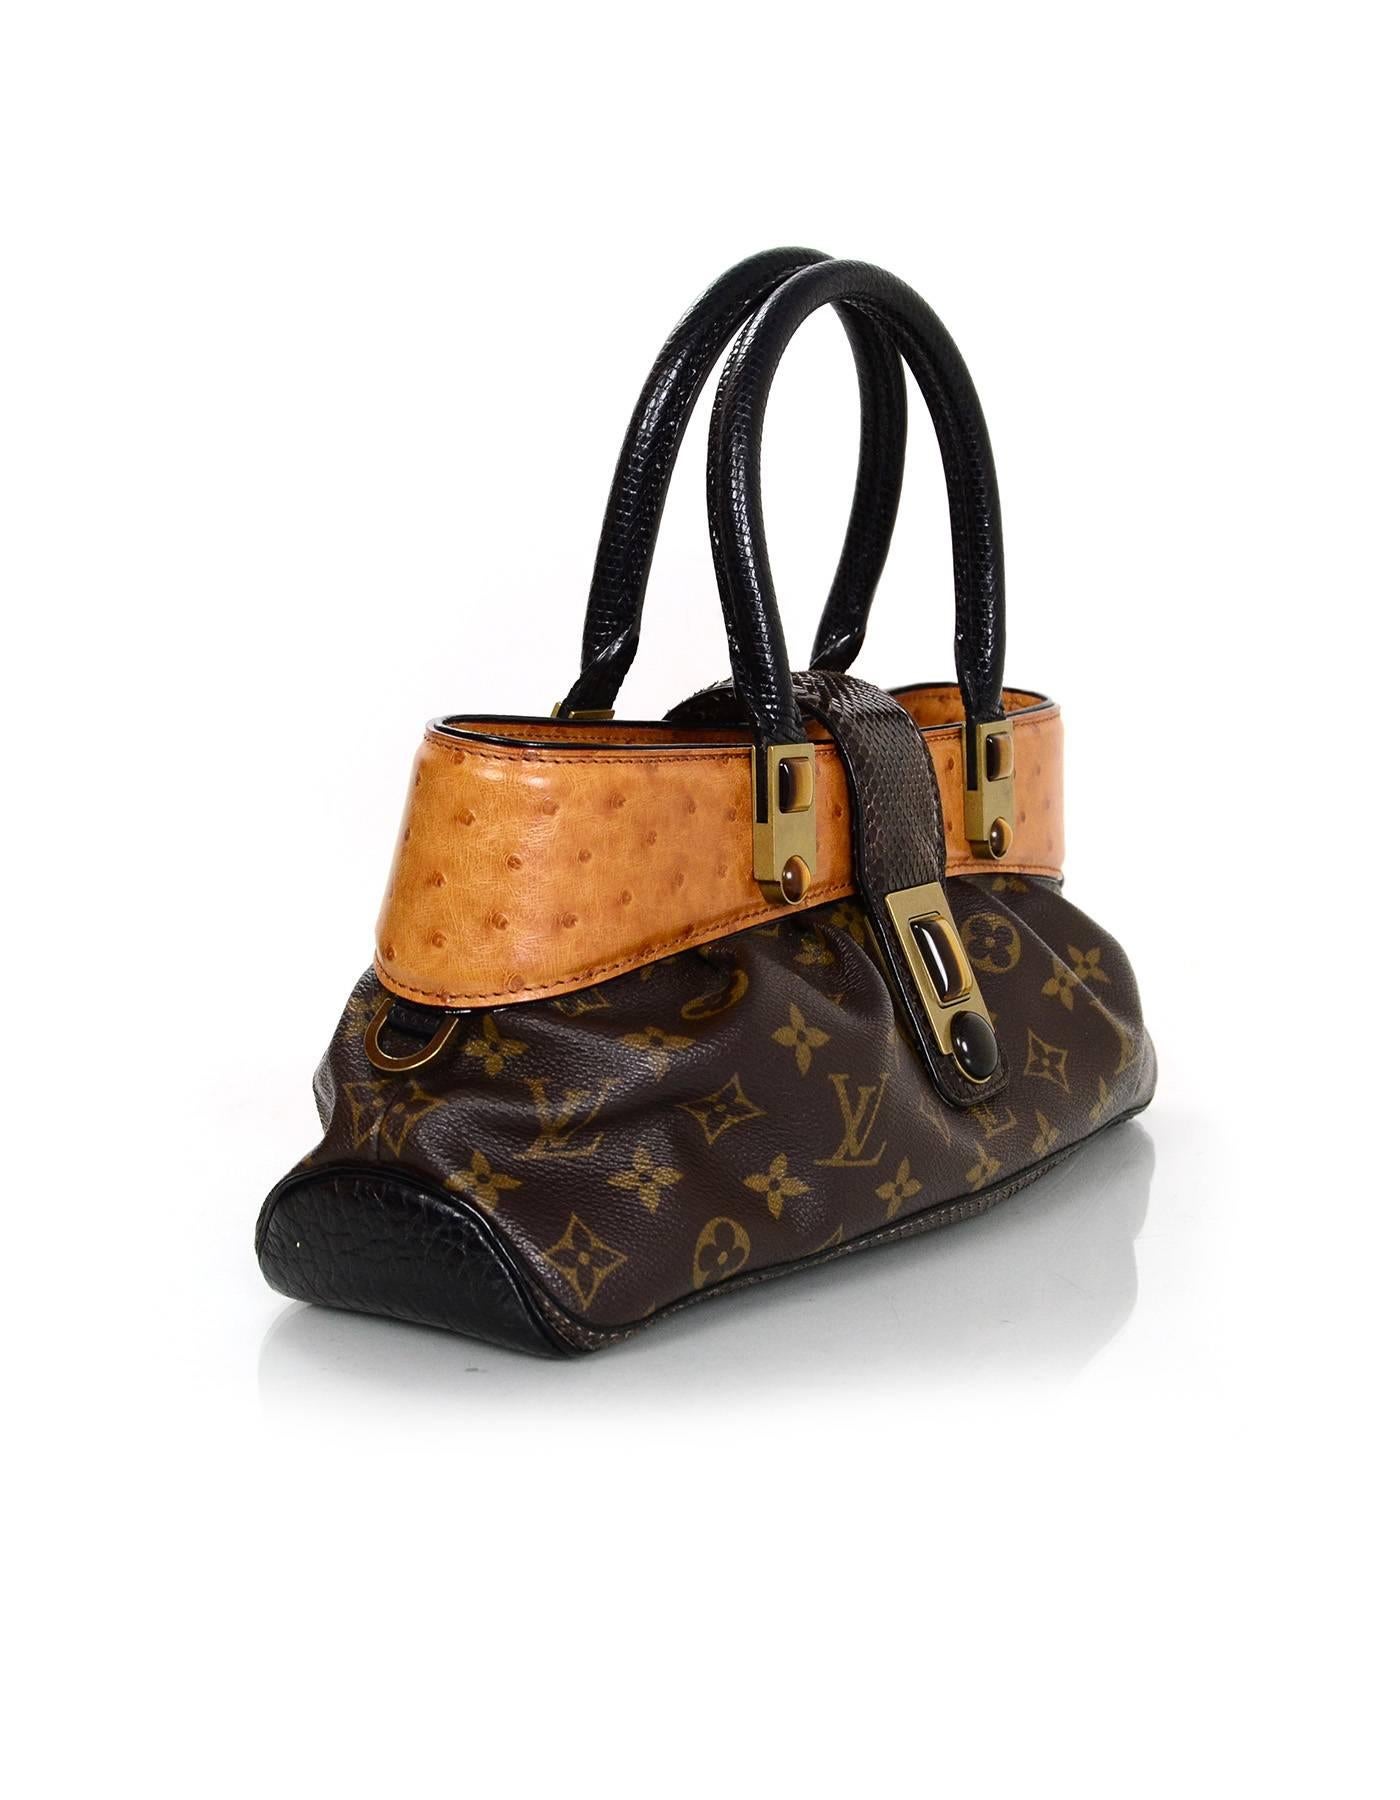 Louis Vuitton Ltd. Ed. Monogram & Ostrich Macha Waltz Bag 
Features lizard wrapped handles, python strap cllosure, ostrich trim at top of bag and leather bottom panel

Made In: France
Year of Production: 2005
Color: Brown and tan
Hardware: